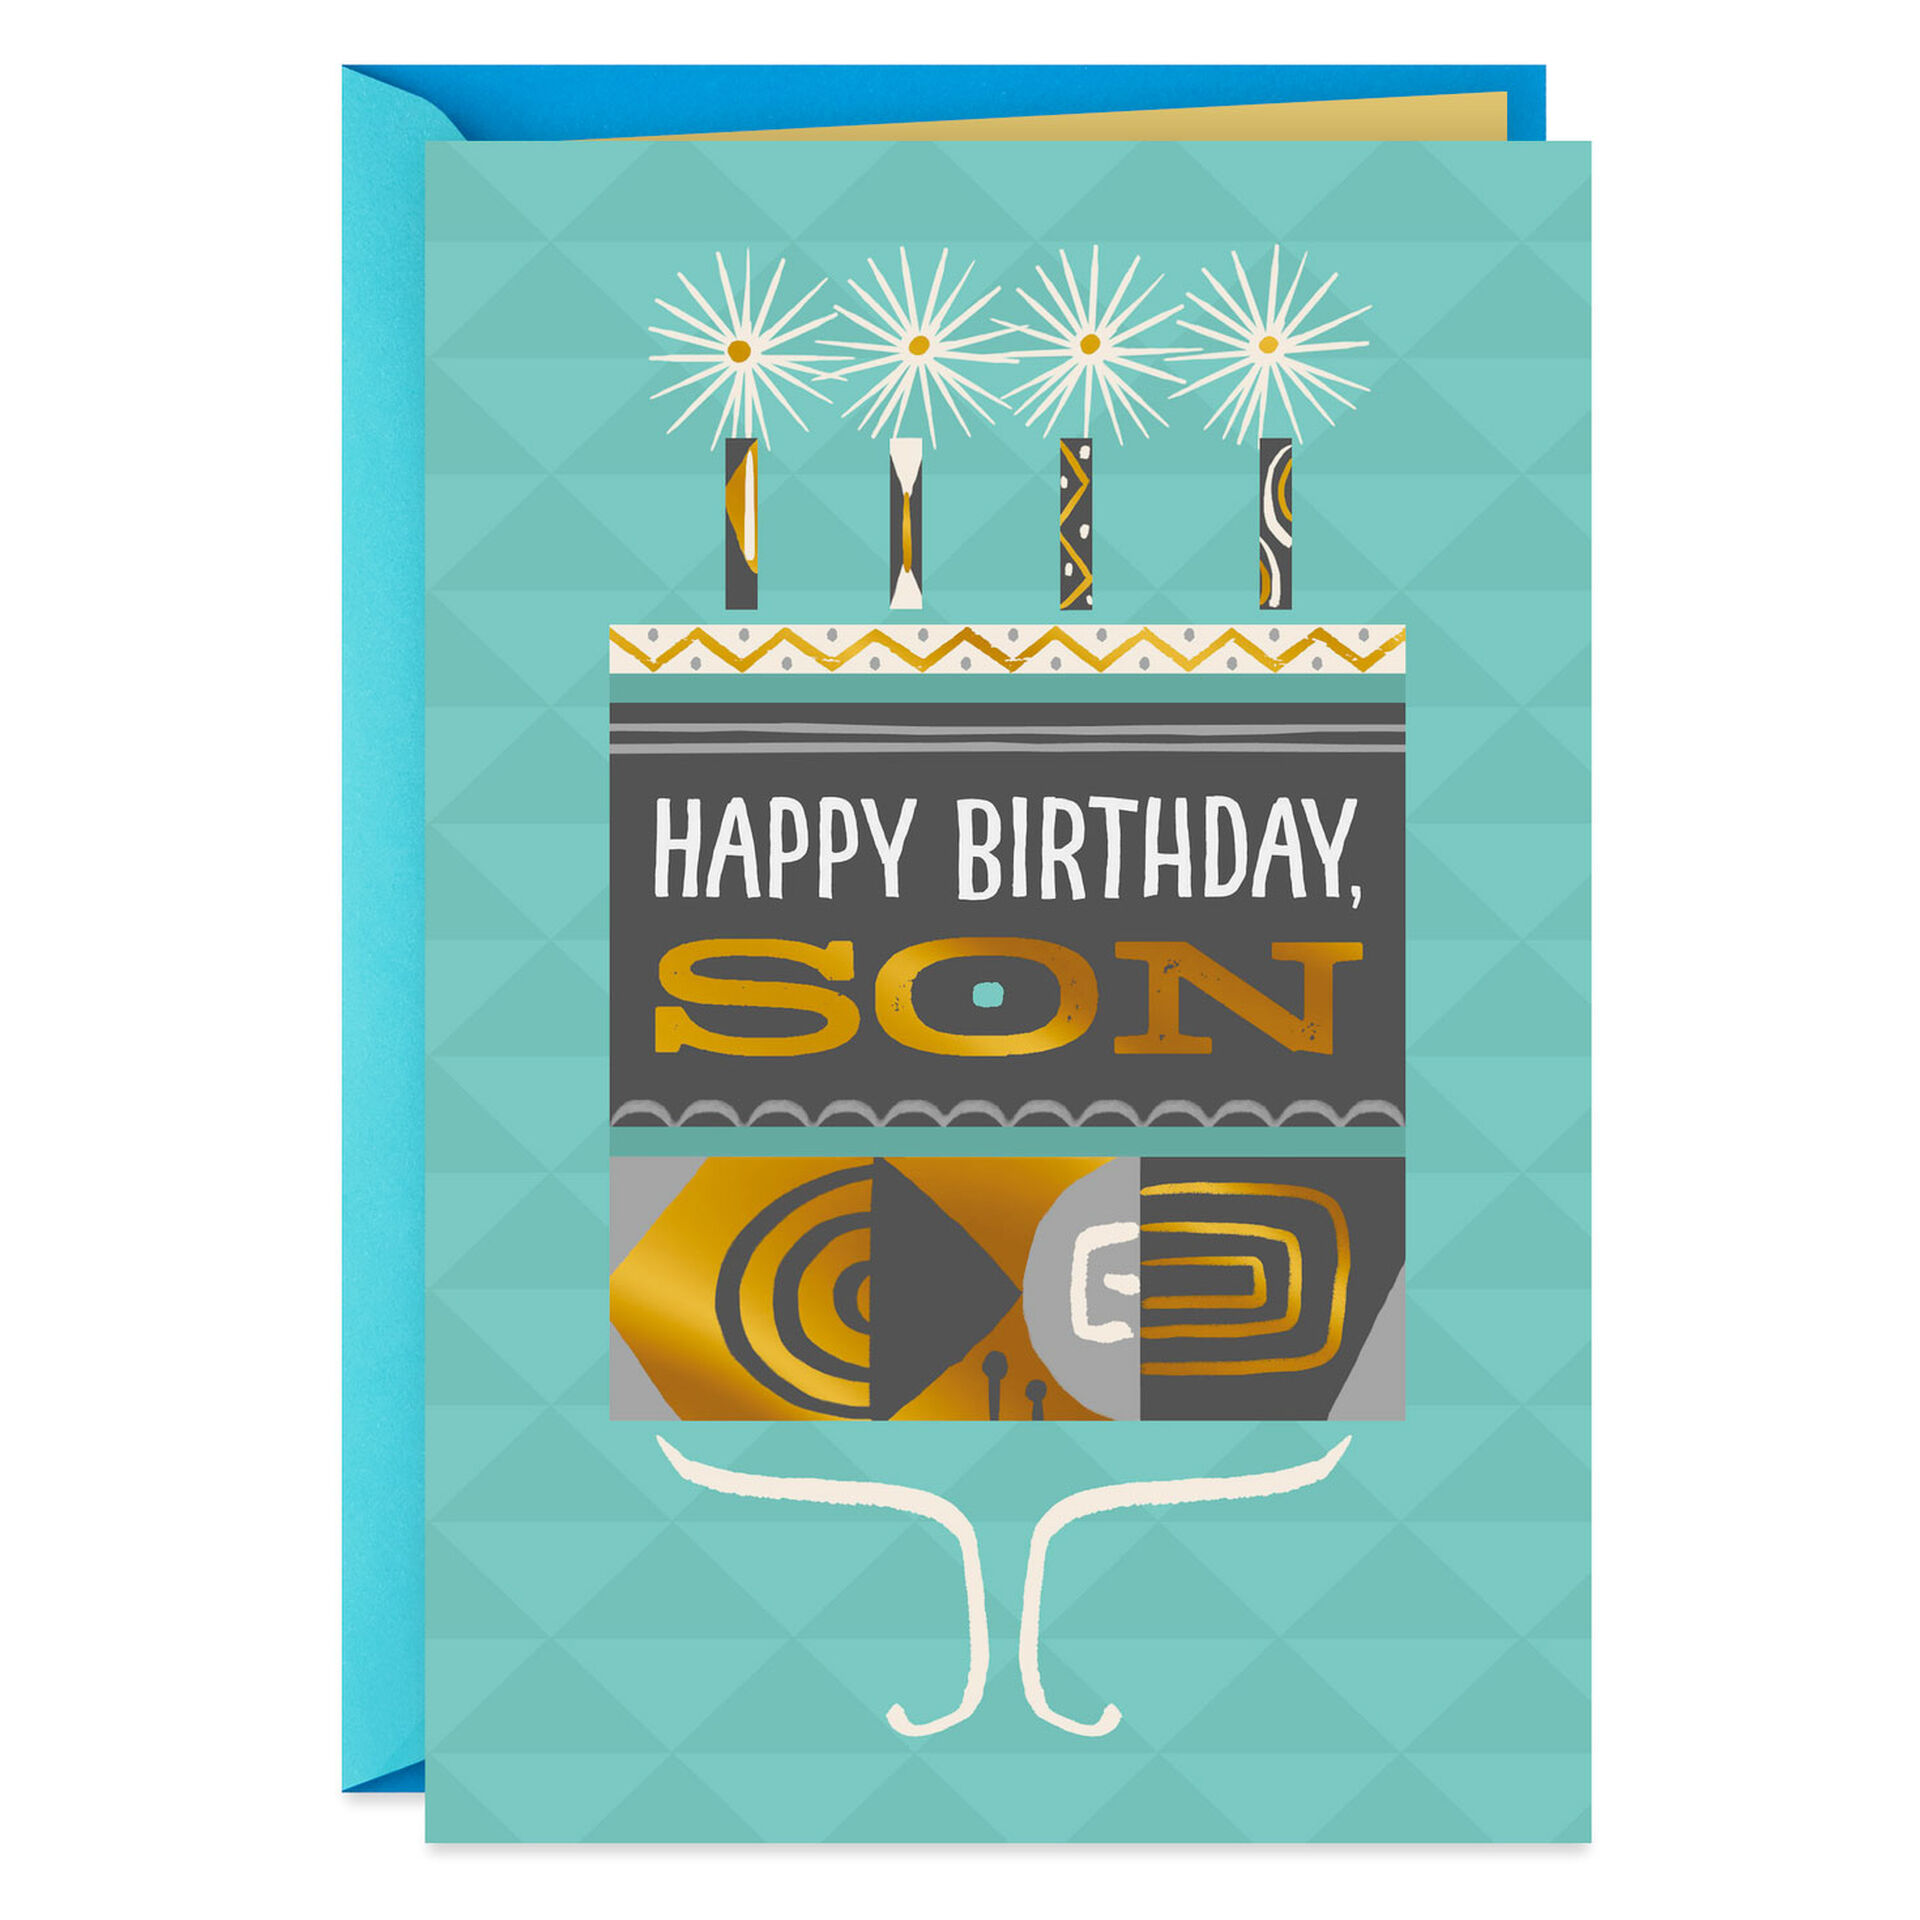 You-Are-Loved-Birthday-Card-for-Son_399MHB8213_01